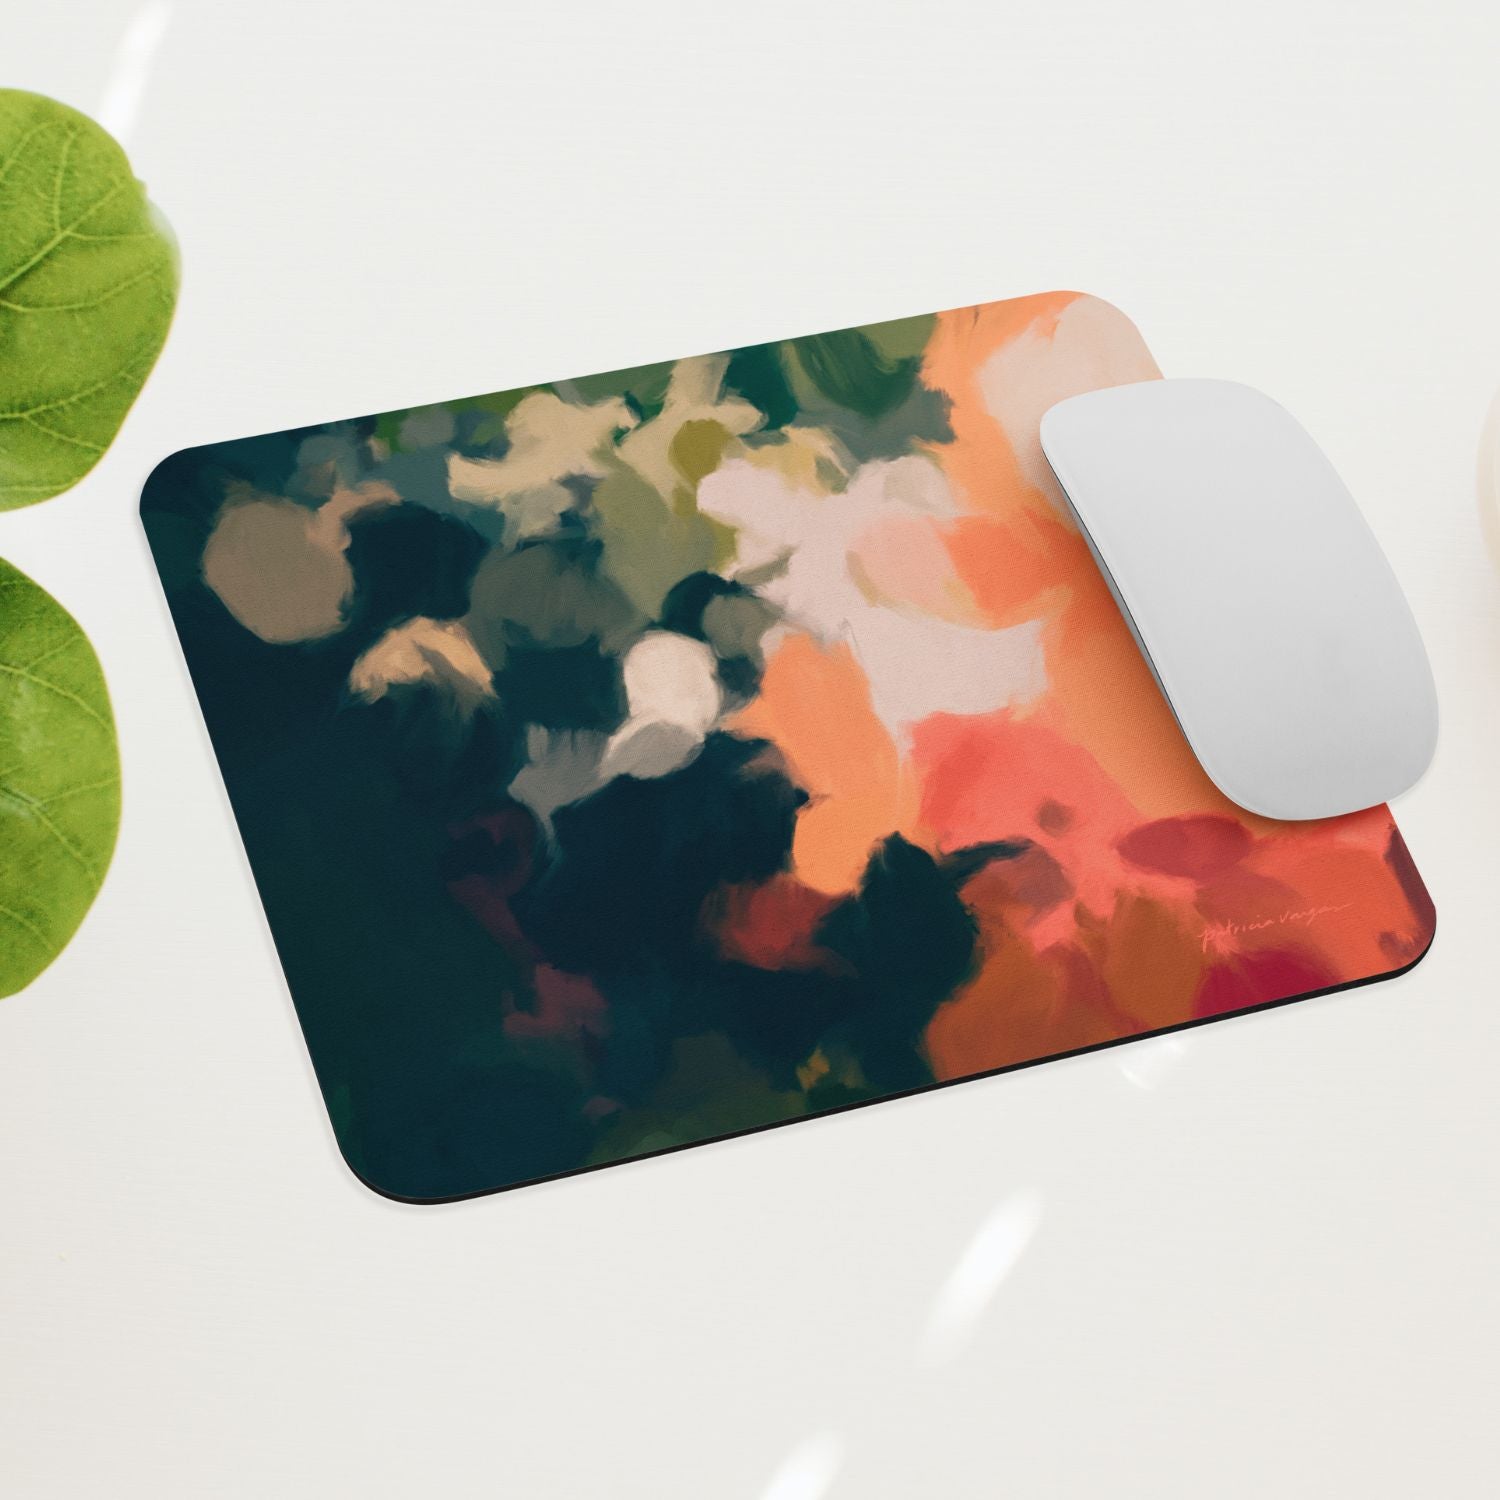 Ria, blue and orange mouse pad for styling your office desk. Featuring artwork by Parima Studio. Home office styling accessories, cubicle styling accessories.